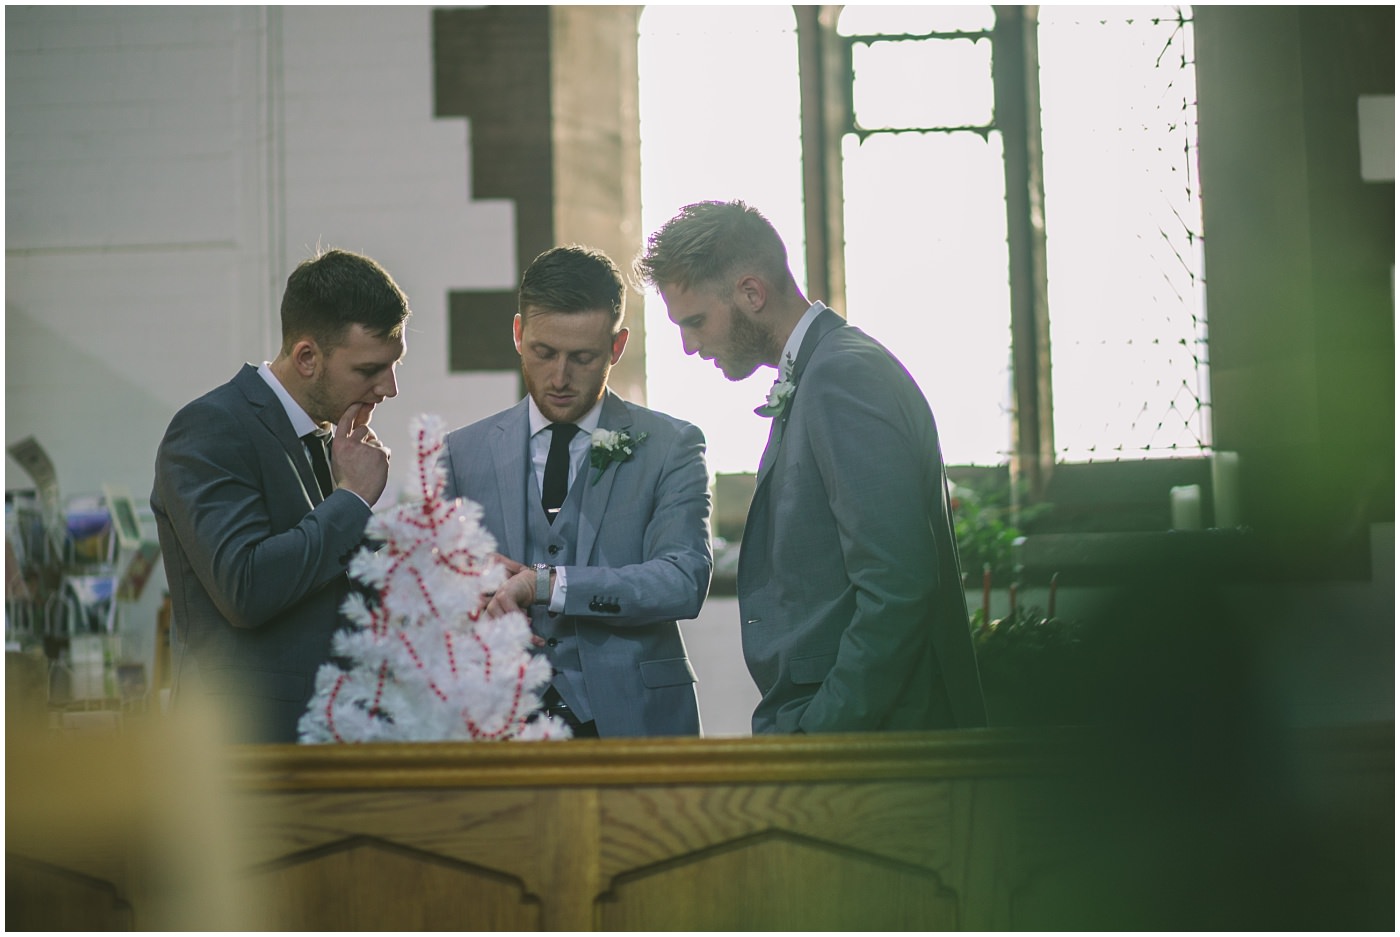 Groom checks his watch at church as he waits for his bride